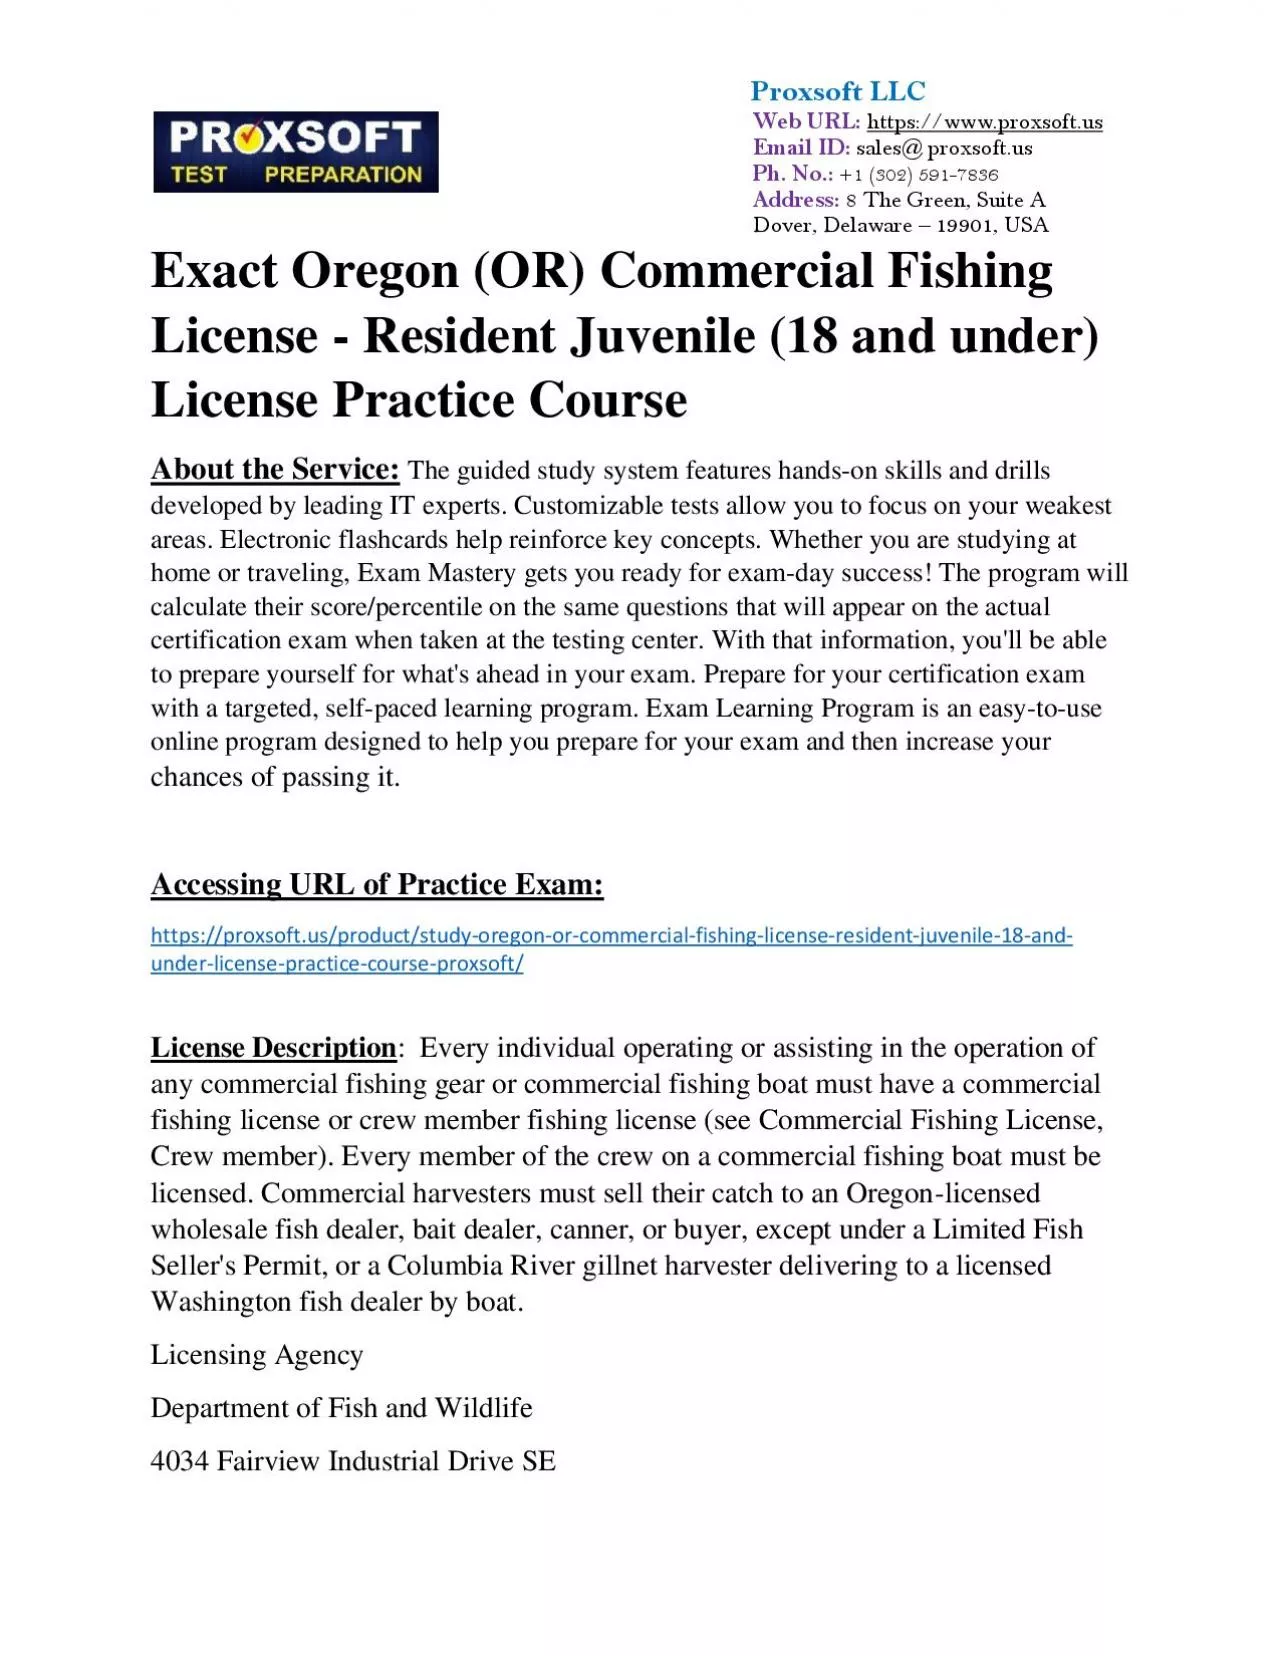 Exact Oregon (OR) Commercial Fishing License - Resident Juvenile (18 and under) License